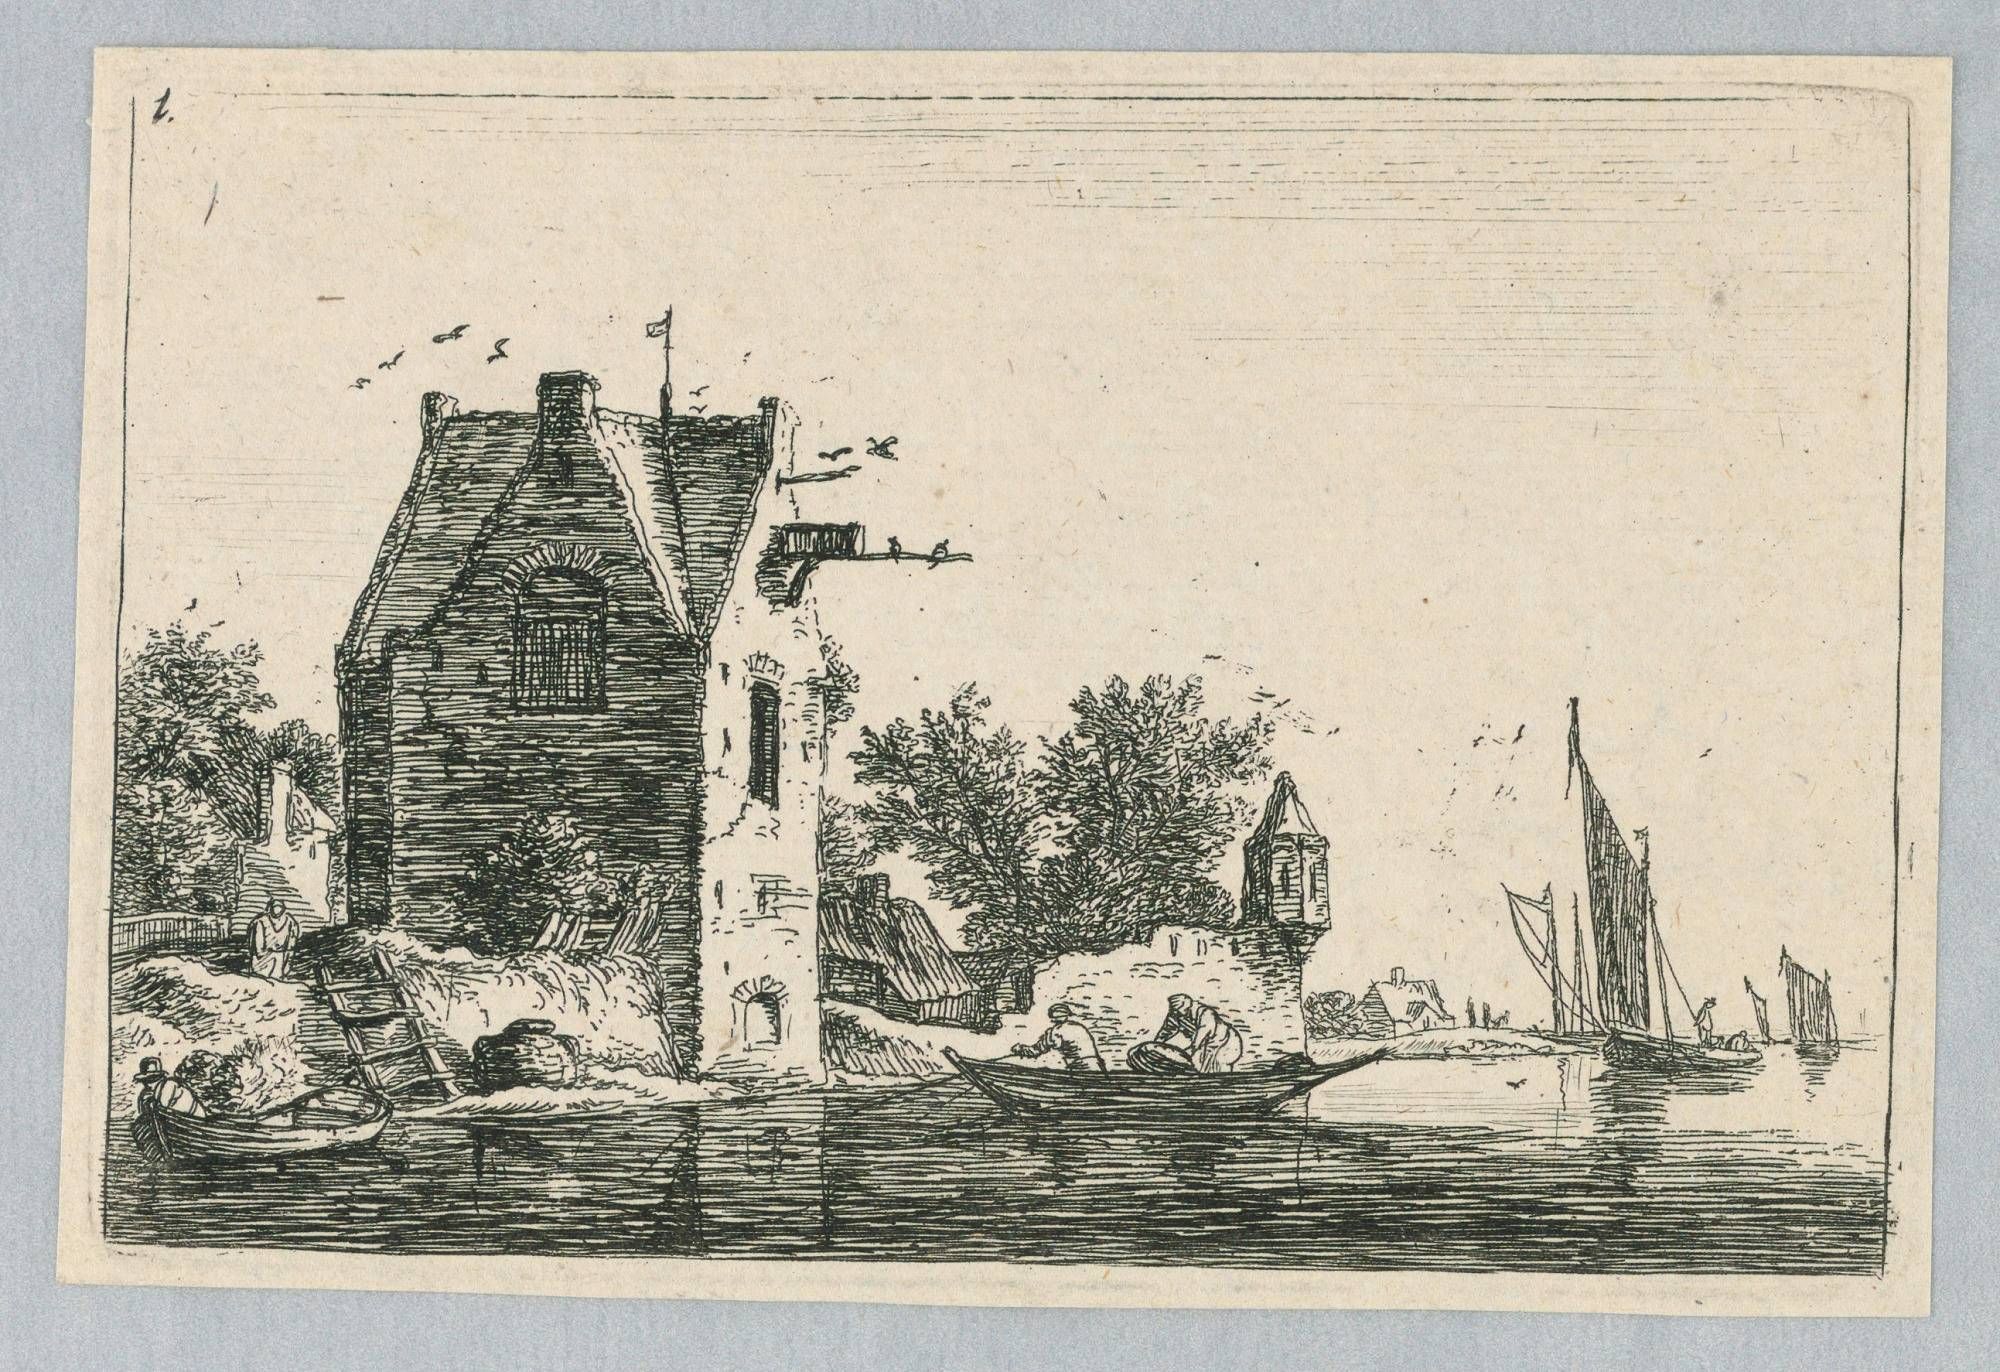 A Tower Near a Ruined Wall at the Water's Edge